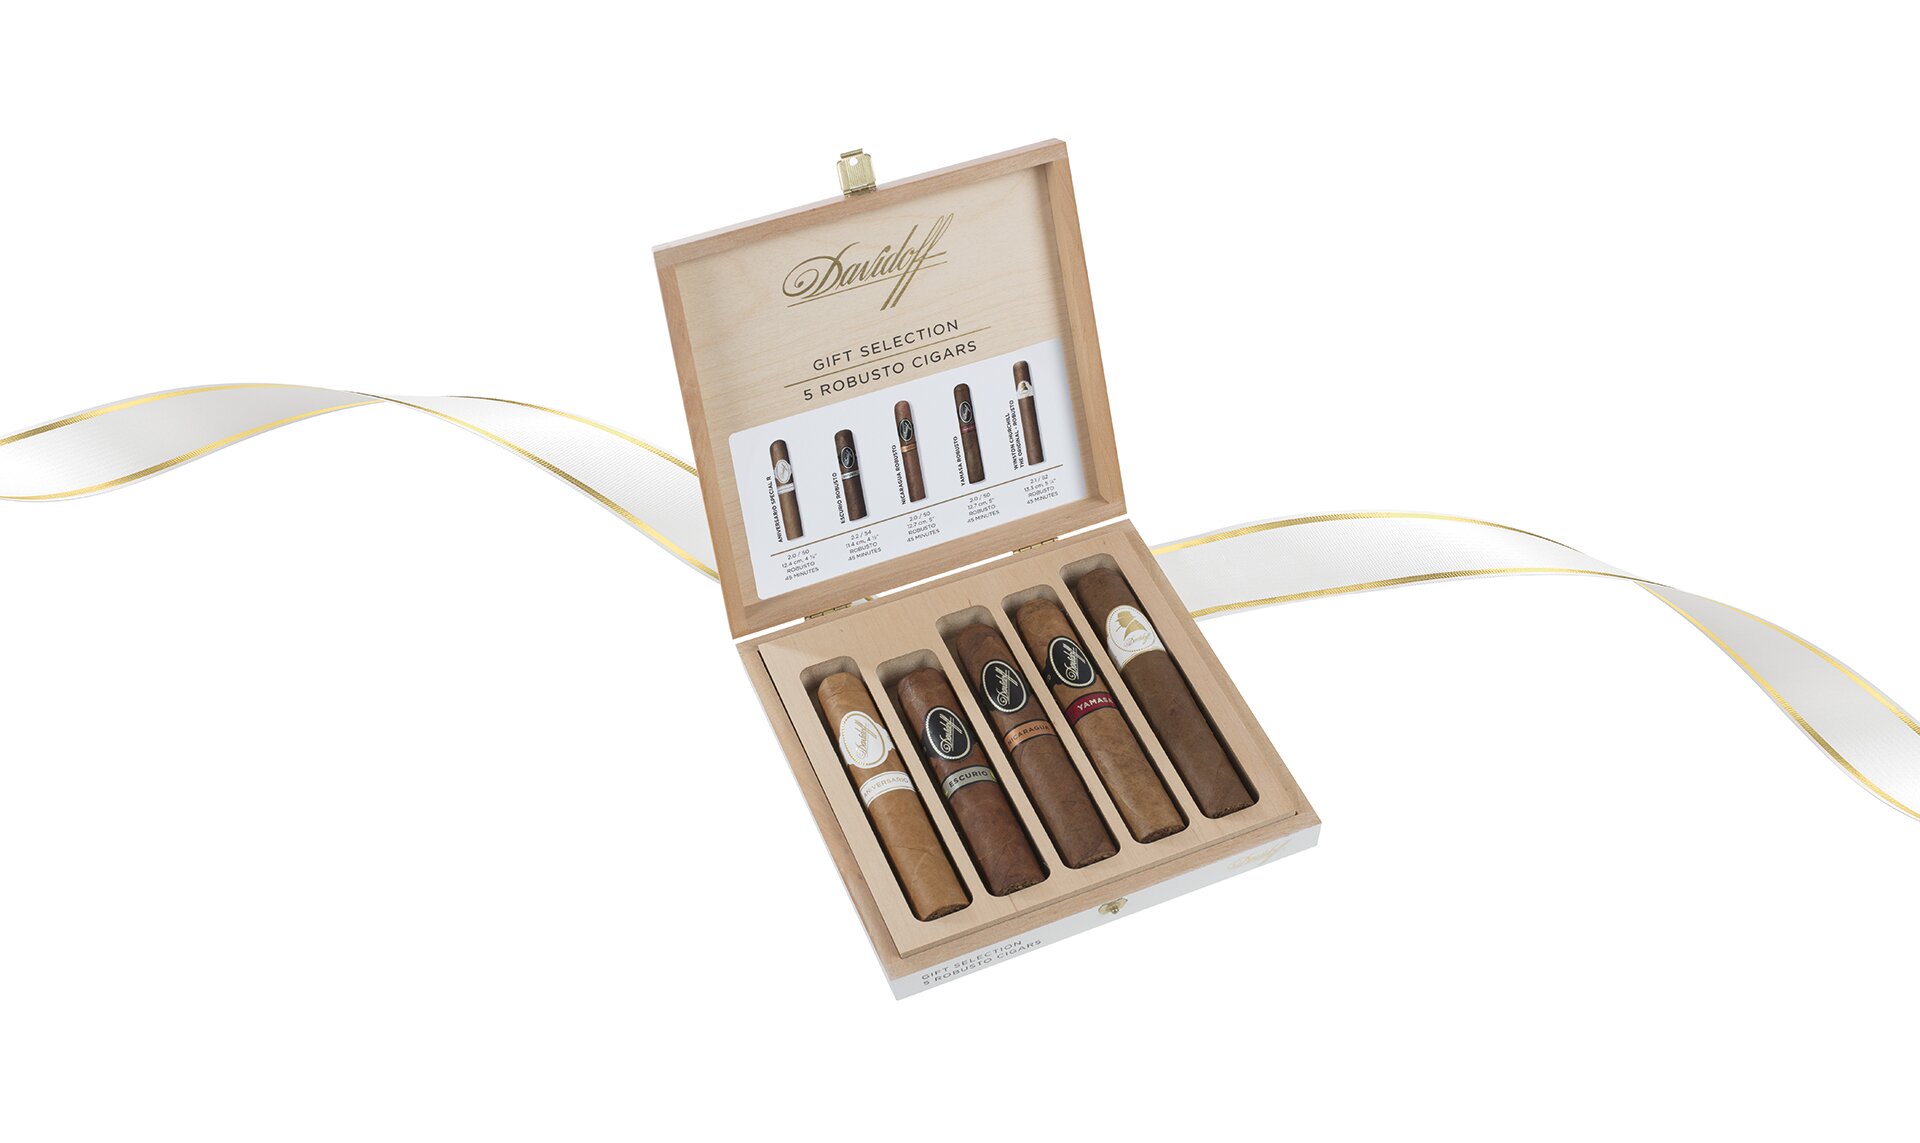 Opened Davidoff Gift Selection wooden box with 5 Robusto cigars inside. White/gold ribbon in the background.